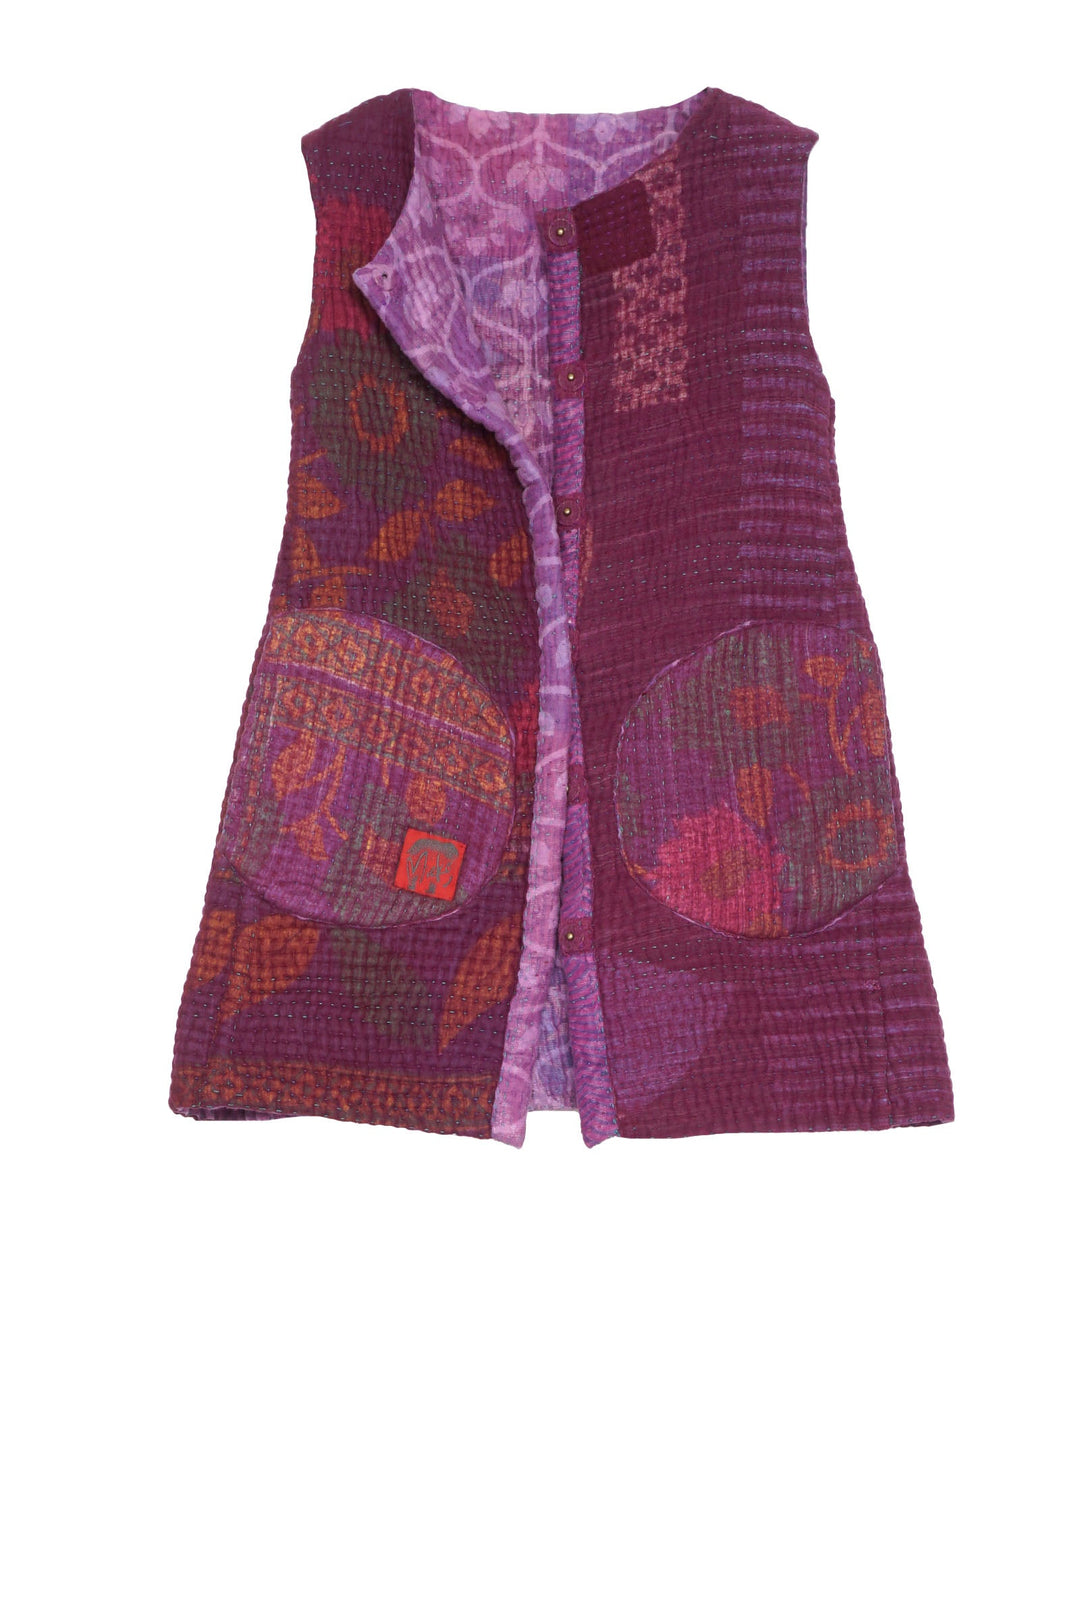 QUILTED VINTAGE COTTON KANTHA CREW NECK FITTED VEST MEDIUM - cq5233-0004s -